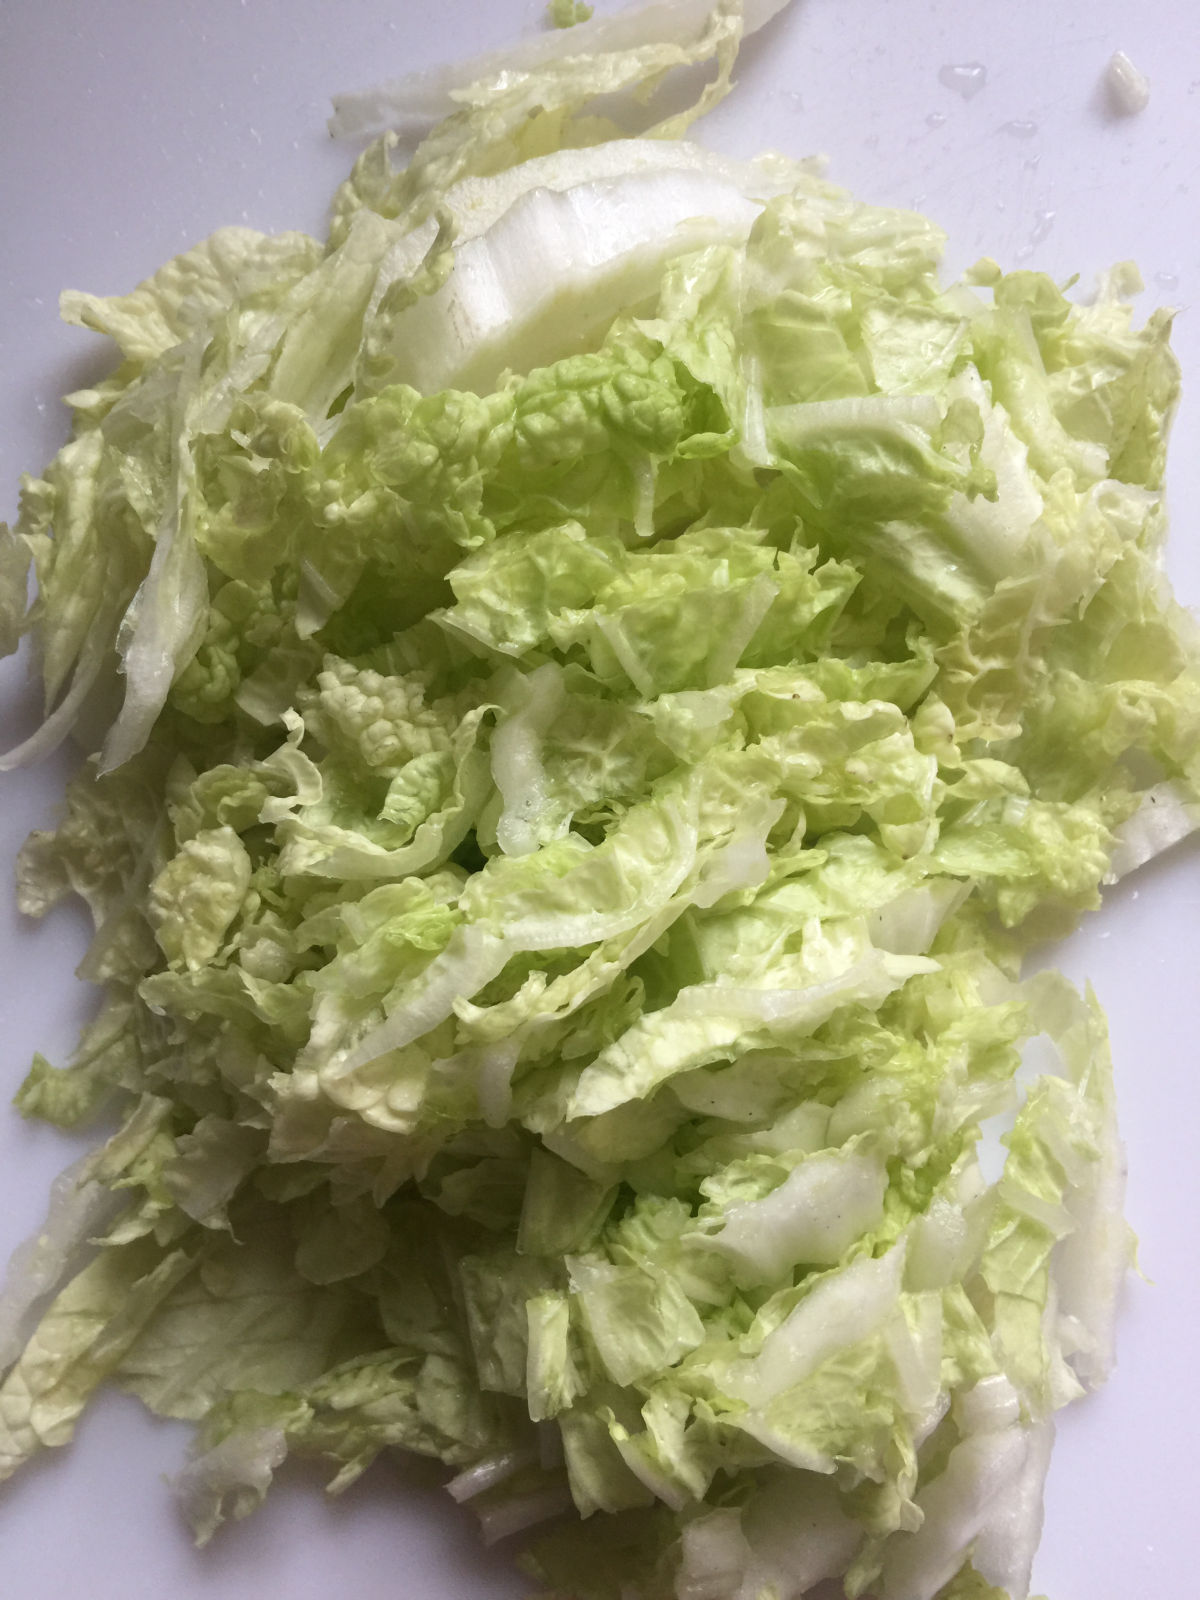 A close up view of Chinese napa cabbage strips.